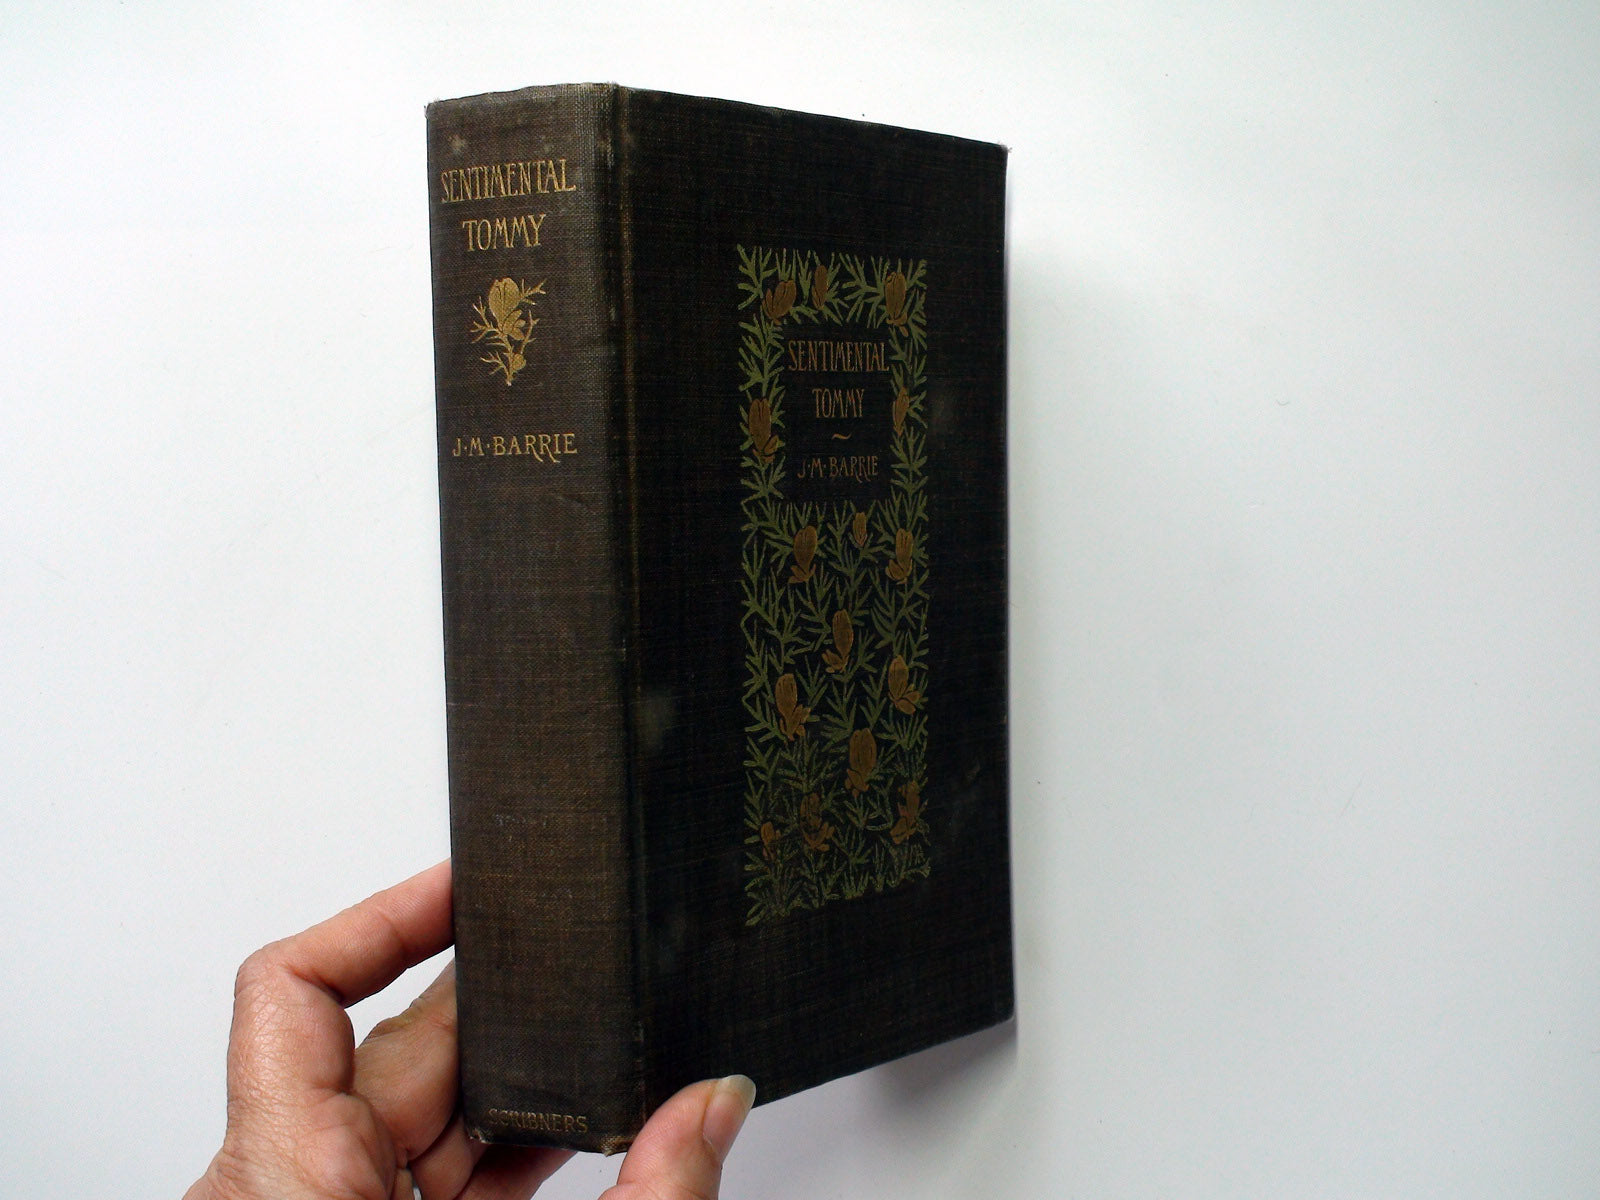 Sentimental Tommy, The Story of His Boyhood, by J. M. Barrie, Illustrated, 1896